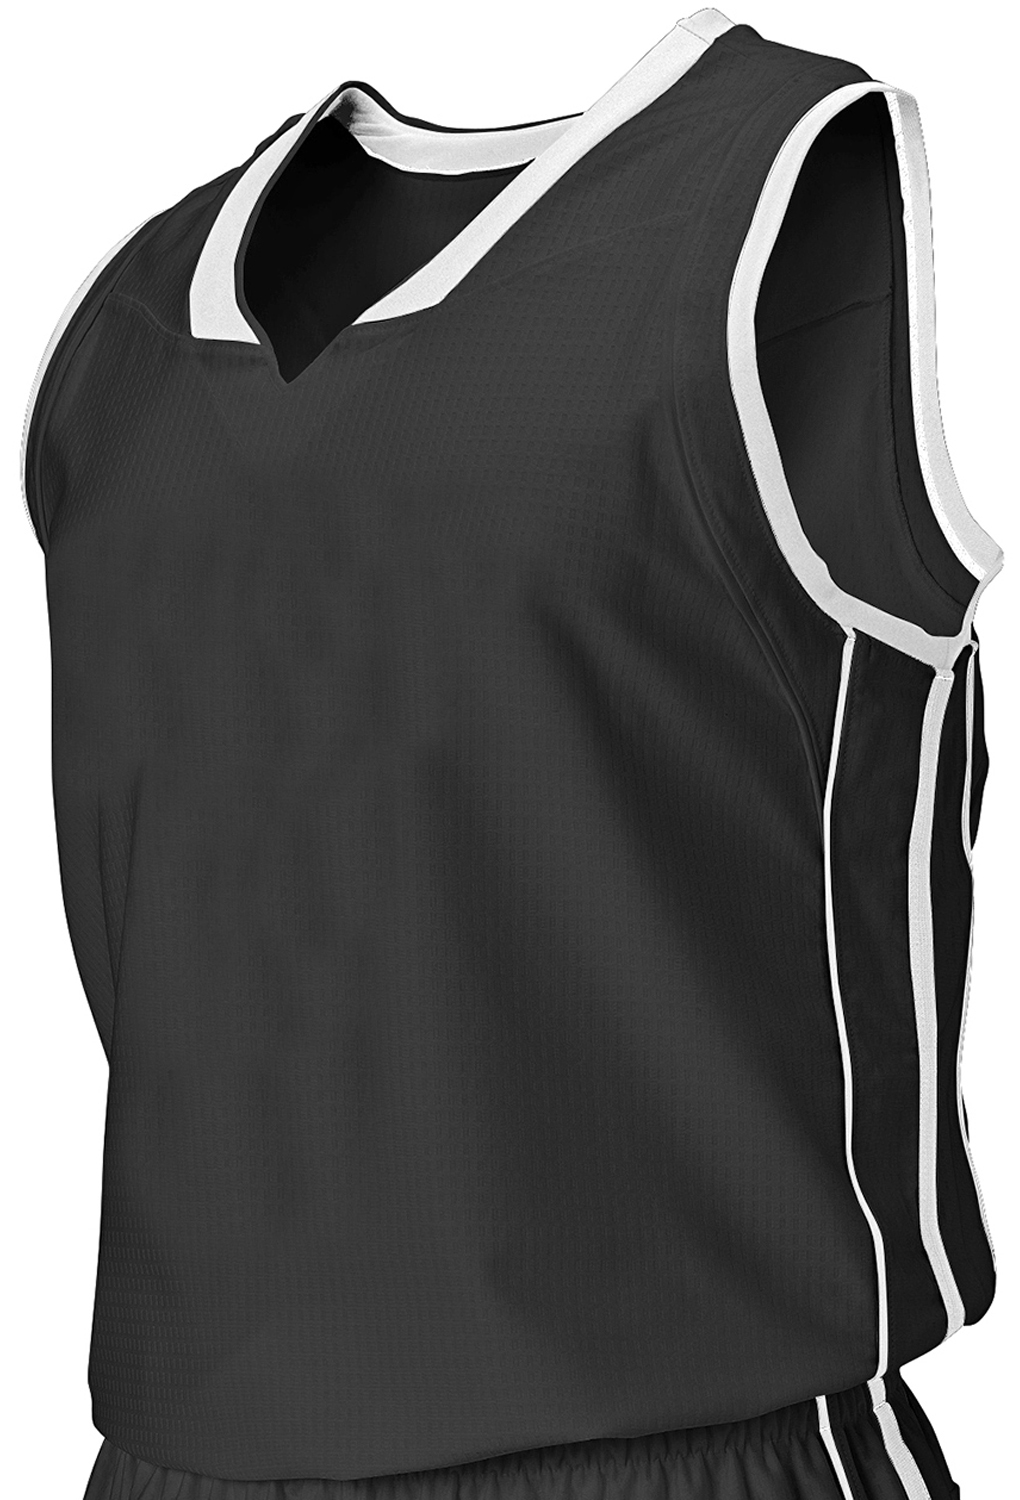 E105604 Mens Athletic Cut Cooling Basketball Jersey CO